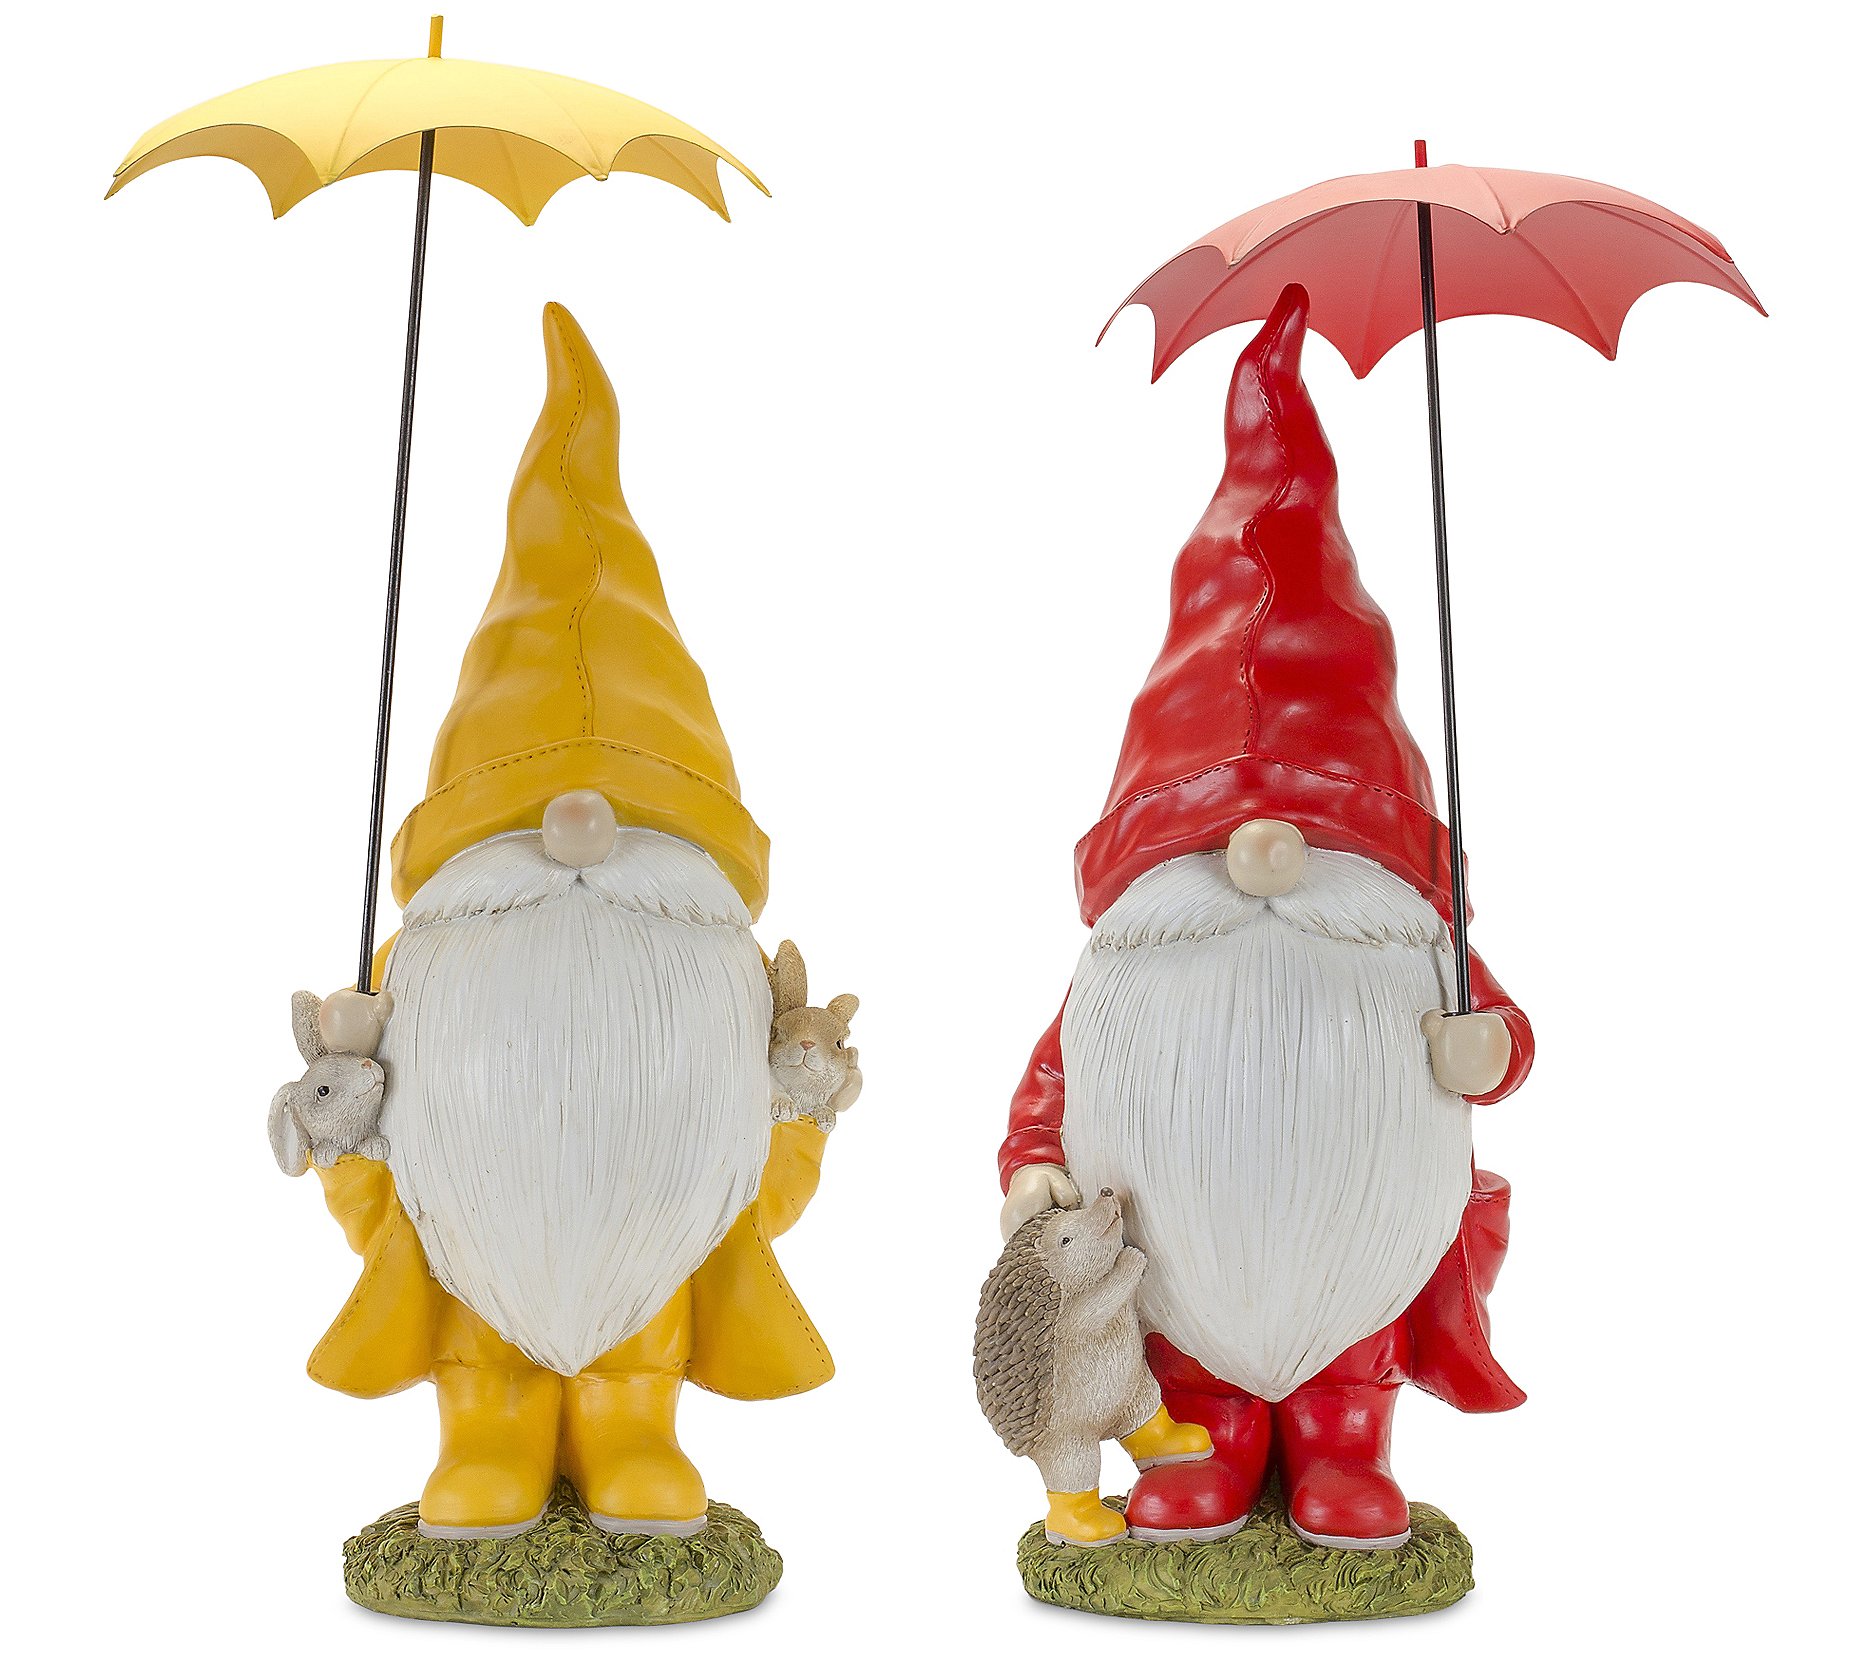 Melrose Gnome with Umbrella and Woodland Animal s (Set of 2)